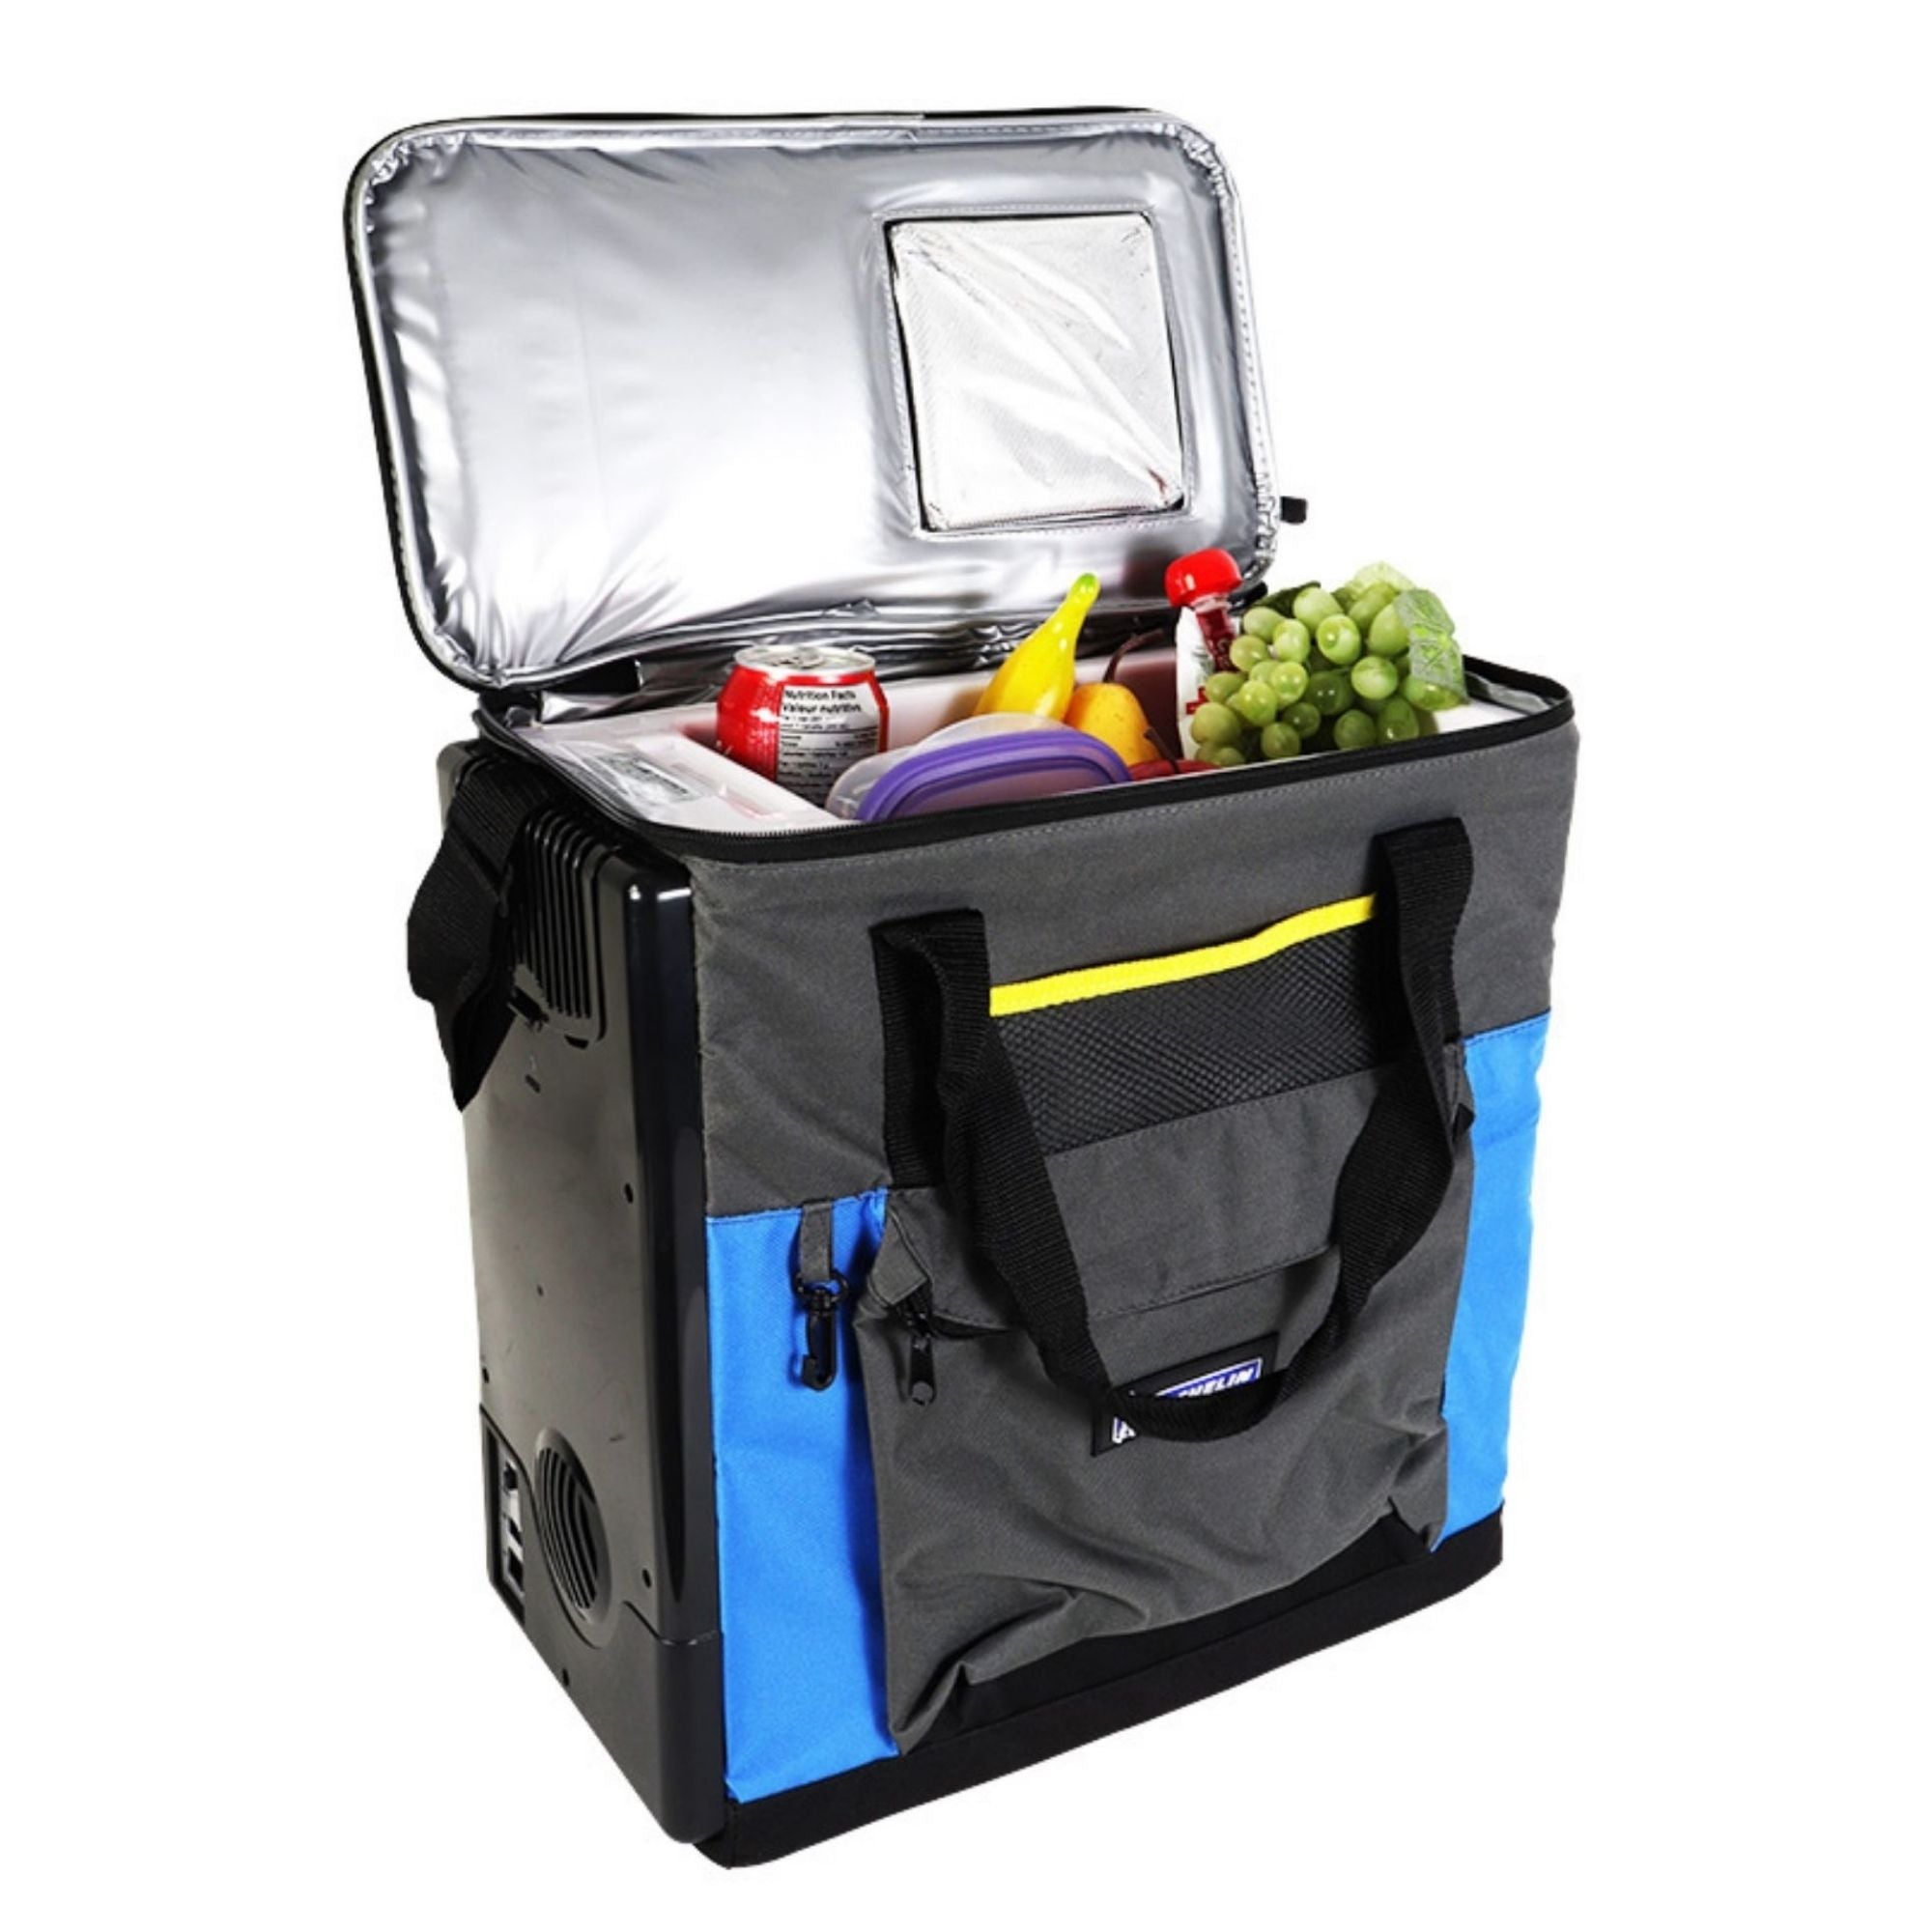 Michelin 12V travel cooler/warmer, open with food and drinks inside, on a white background